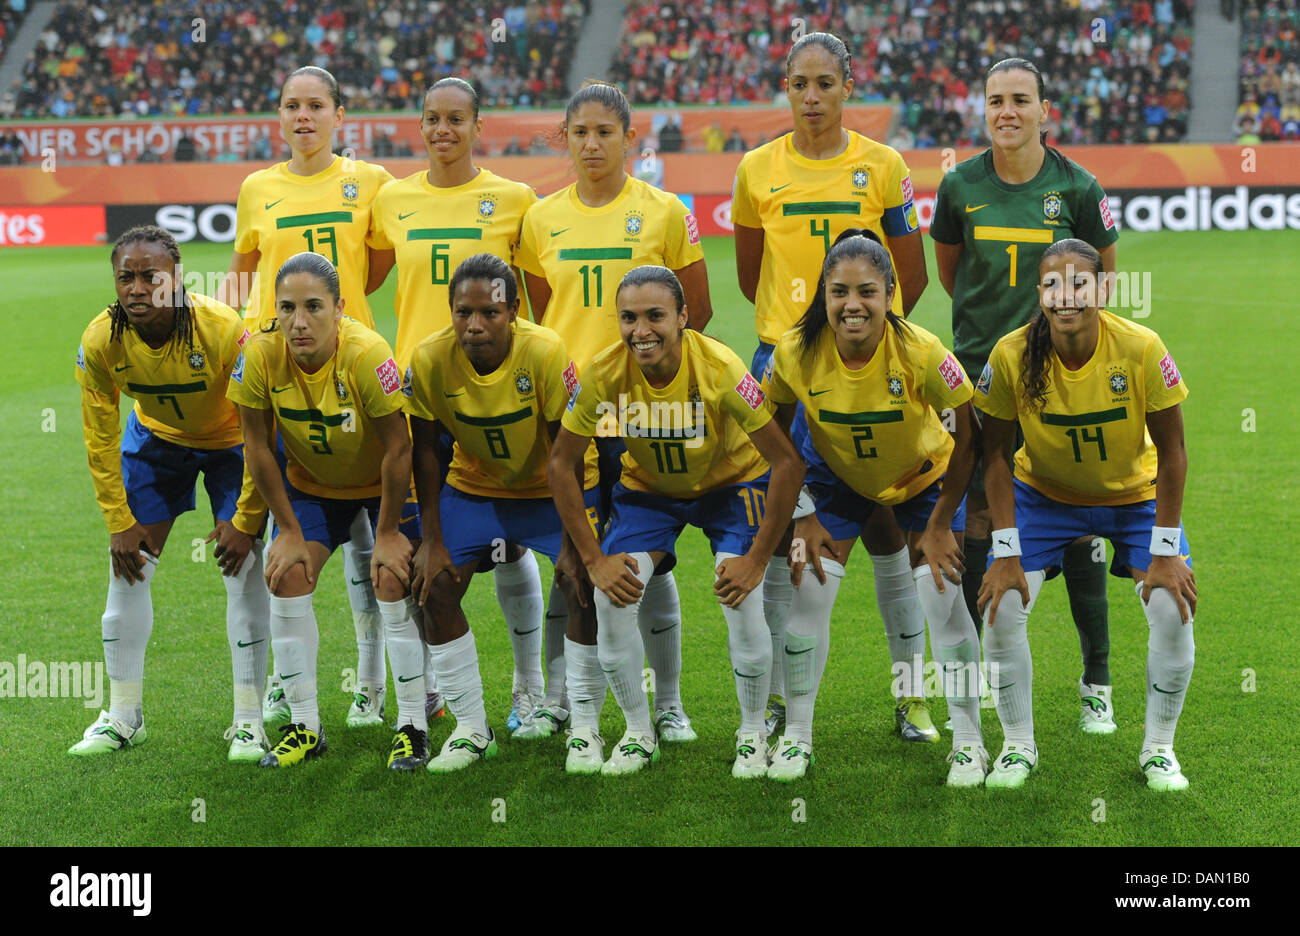 Team Brazil (back L-R) Erika, Rosana, Cristiane, Aline, Andreia (front L-R) Ester, Daiane, Formiga, Marta, Maurine, Fabiana poses for a group photo prior to the Group D match Brazil against Norway of FIFA Women's World Cup soccer tournament at the Arena Im Allerpark, Wolfsburg, Germany, 03 July 2011. Foto: Julian Stratenschulte dpa/lni  +++(c) dpa - Bildfunk+++ Stock Photo